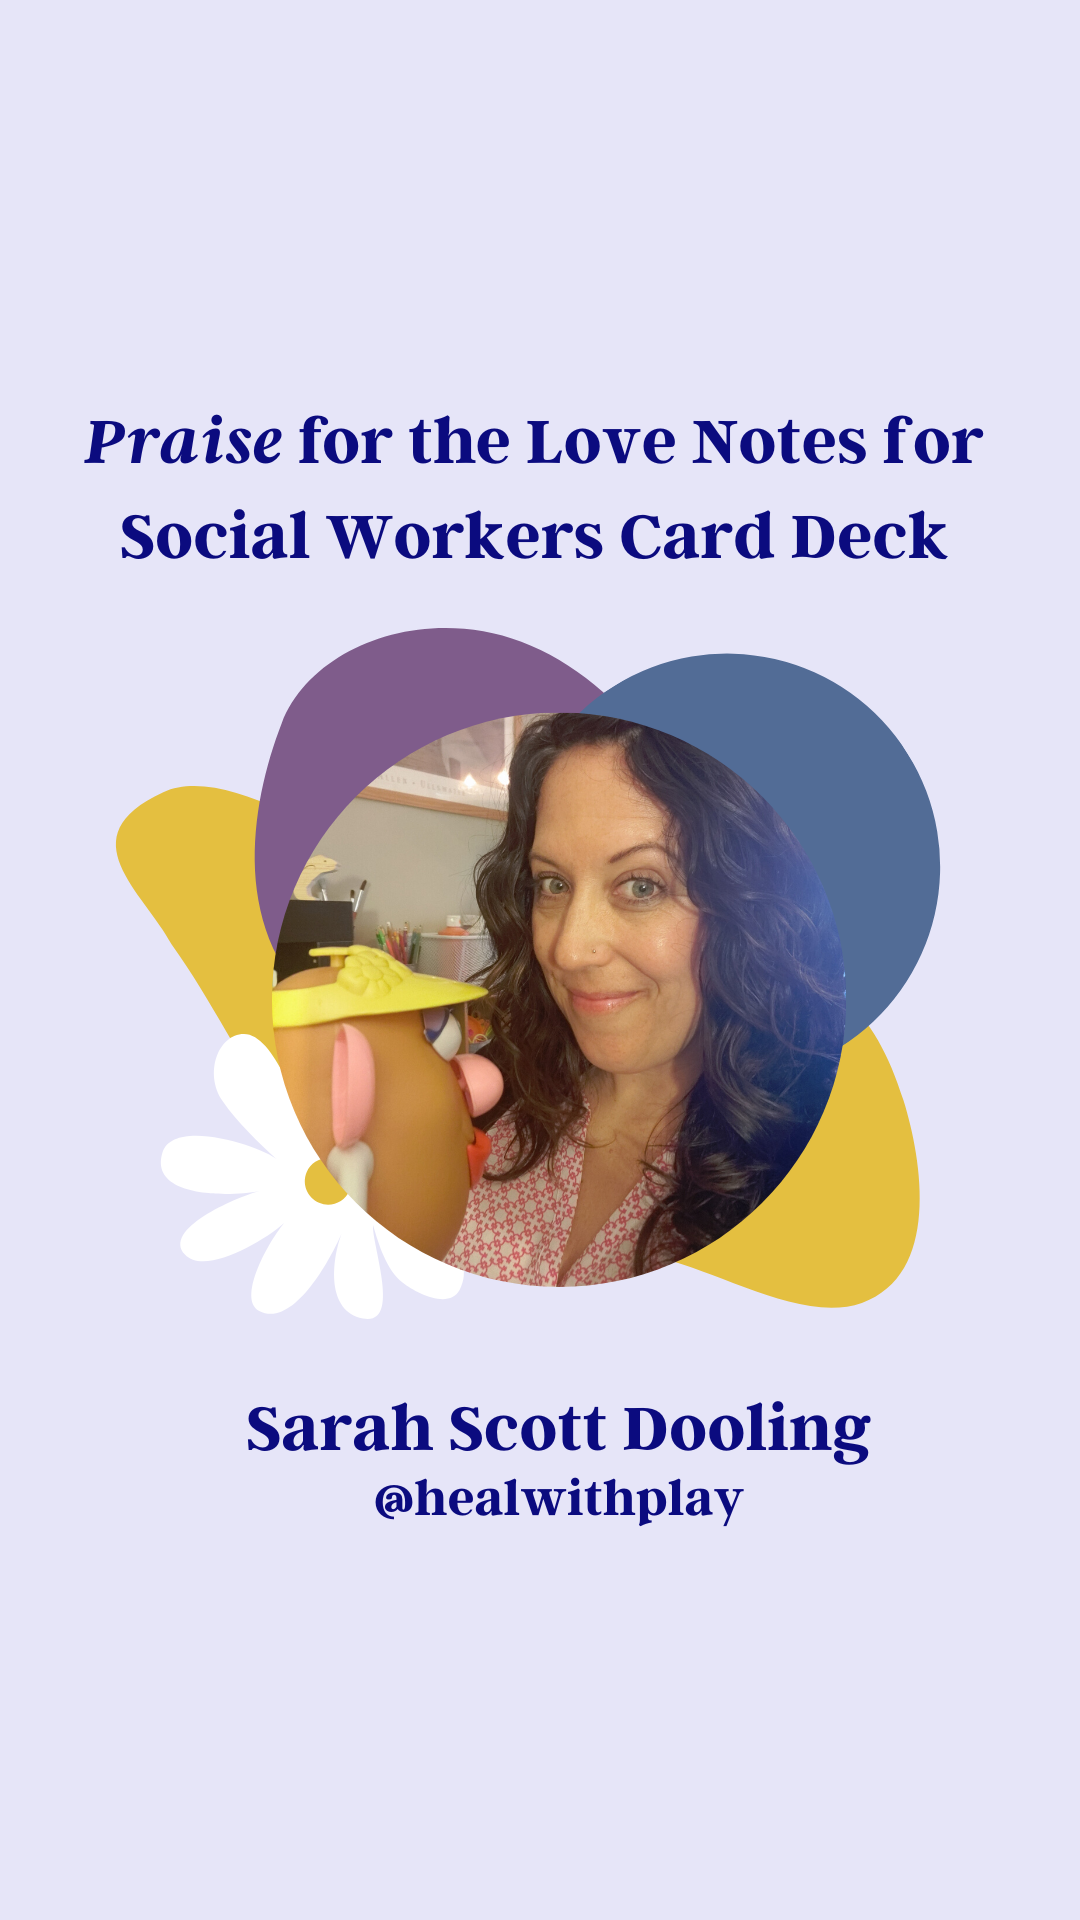 Sarah Scott Dooling, Social Worker and Play Therapist, offers praise for the Love Notes for Social Workers Card Deck. She can be found @healwithplay on Instagram. 